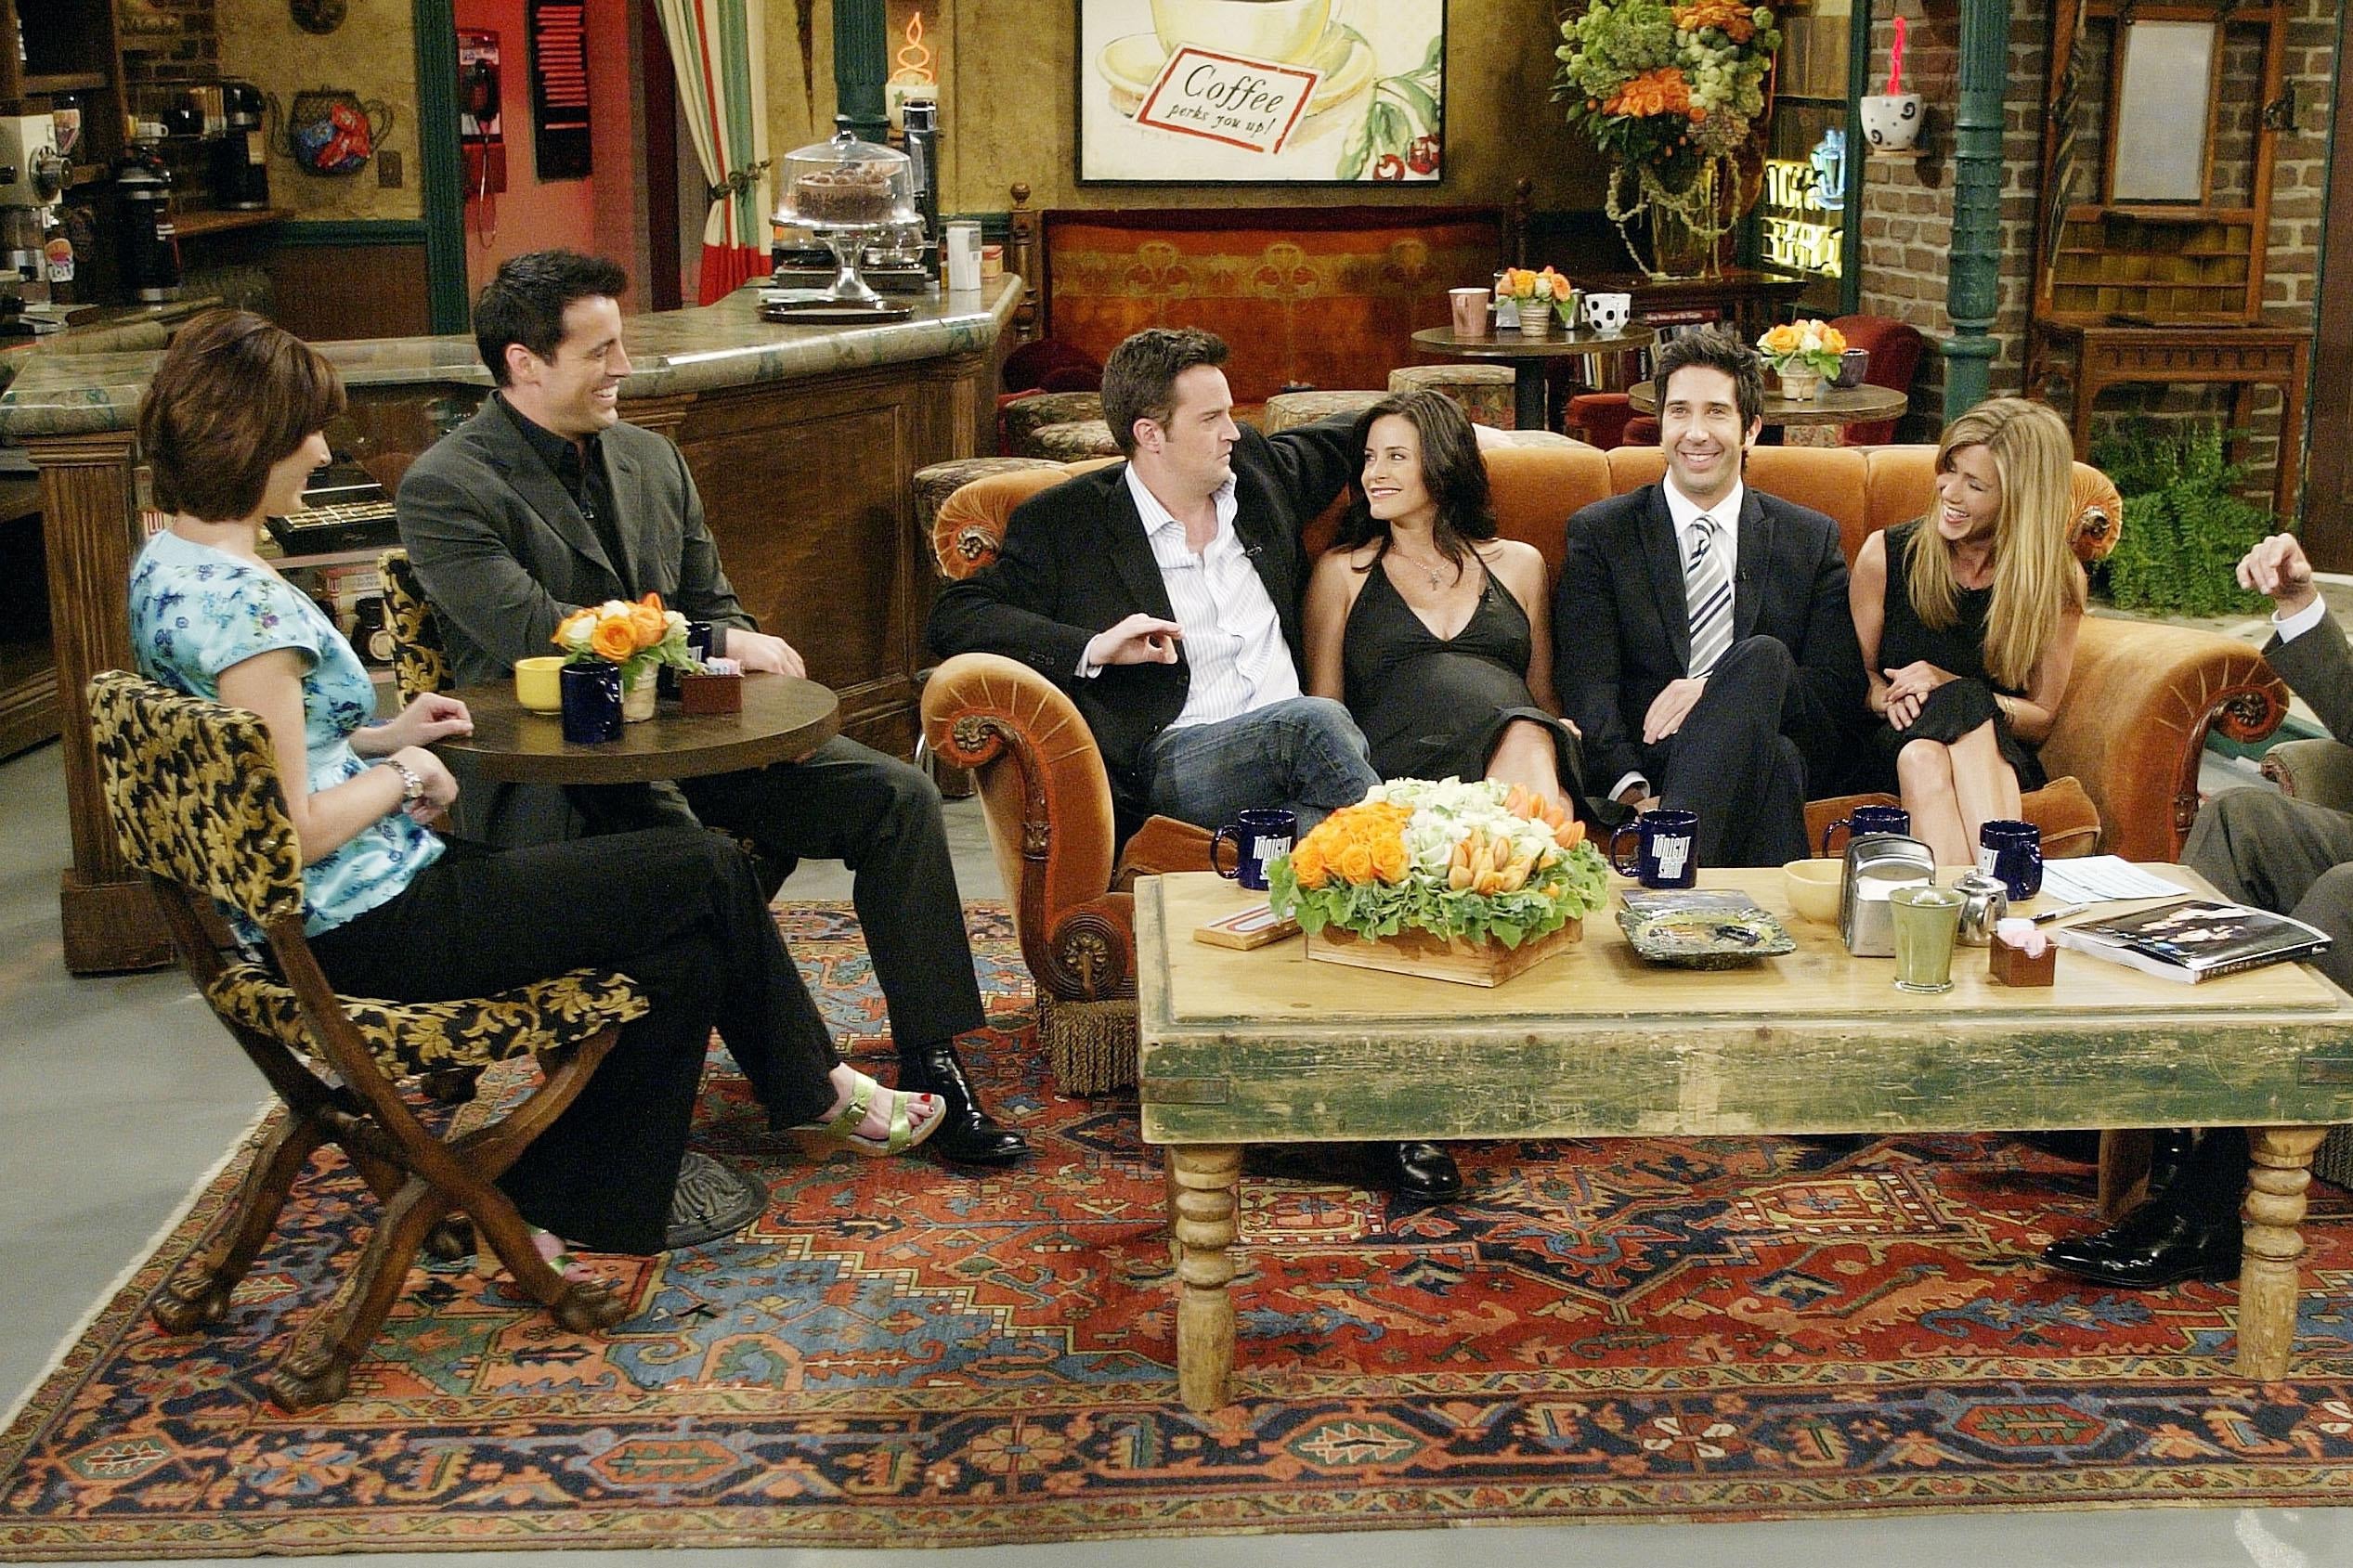 In this handout photo provided by NBC, the cast of "Friends", actors Lisa Kudrow, Matt LeBlanc, Matthew Perry, Courteney Cox-Arquette, David Schwimmer and Jennifer Aniston sat down with Jay Leno for a special "Tonight Show," on the set of Central Perk on May 6, 2004 in Los Angeles, California. (Photo by Paul Drinkwater/NBC via Getty Images)